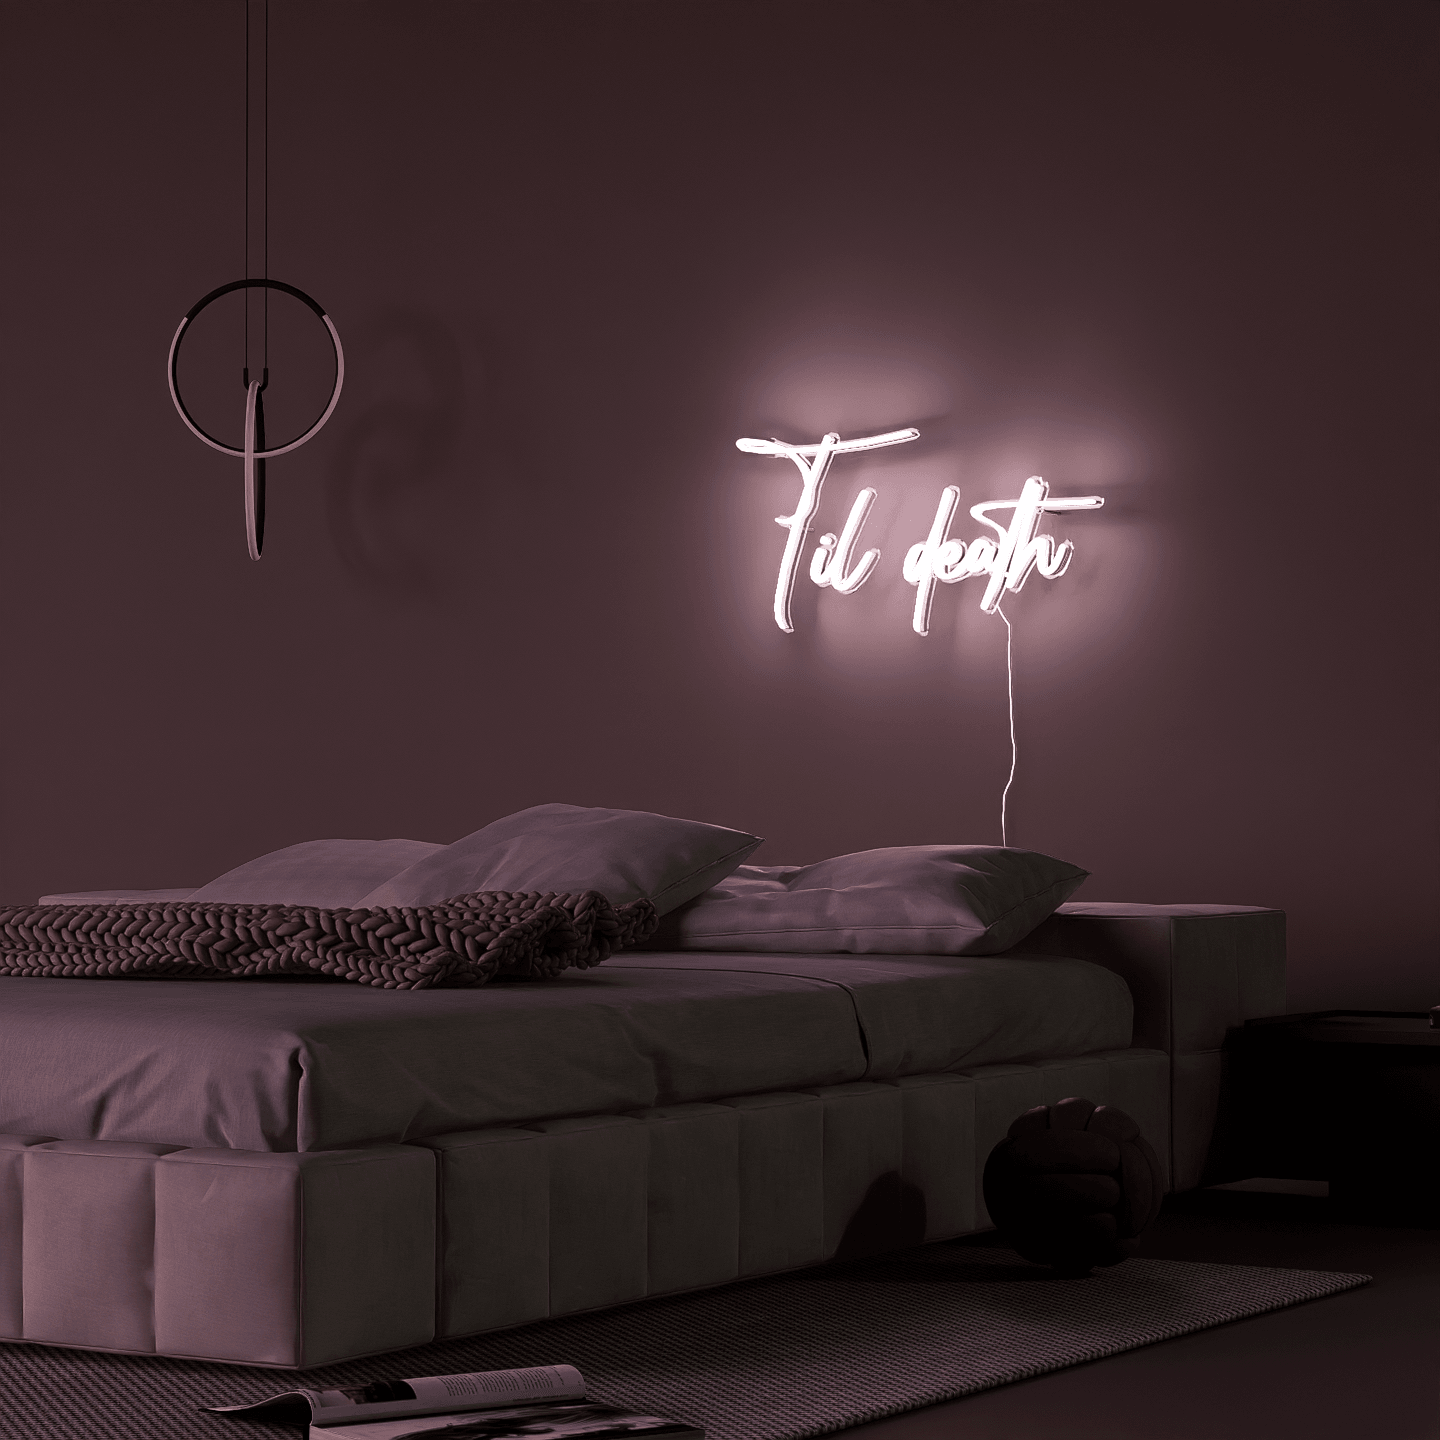 side-shot-of-white-neon-lights-lit-at-night-hanging-on-the-wall-for-display-til-death